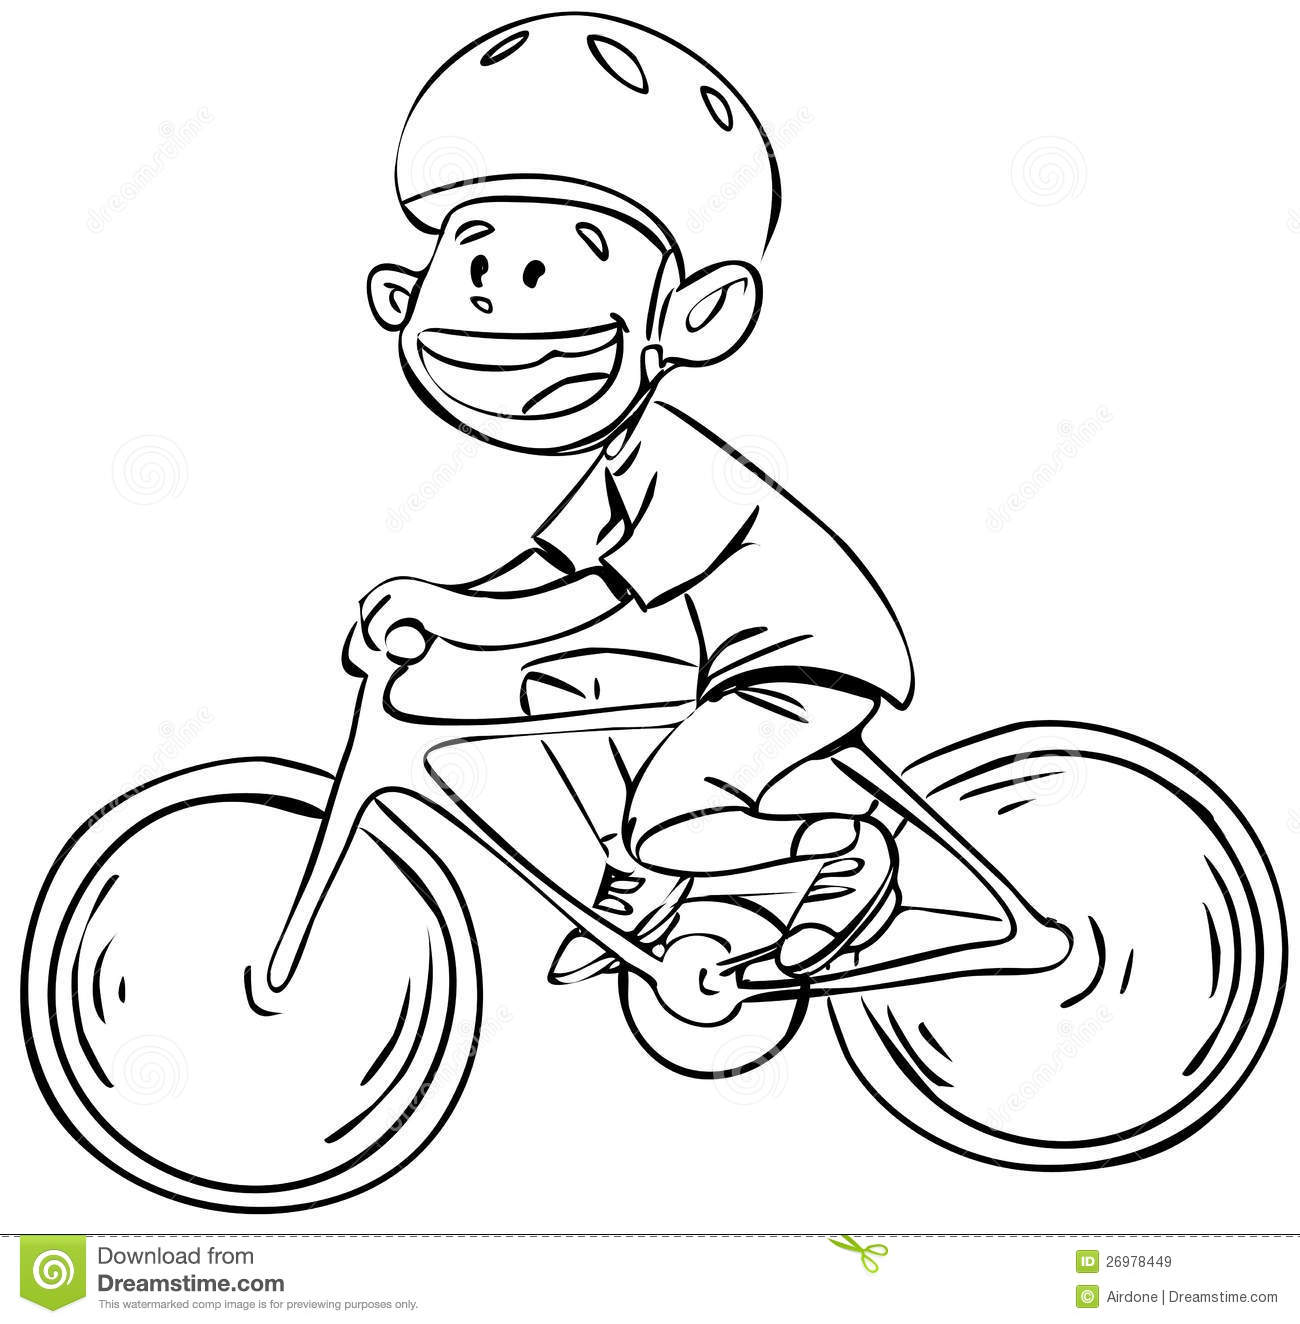 Bicycle Boy In Black And White Royalty Free Stock Images   Image